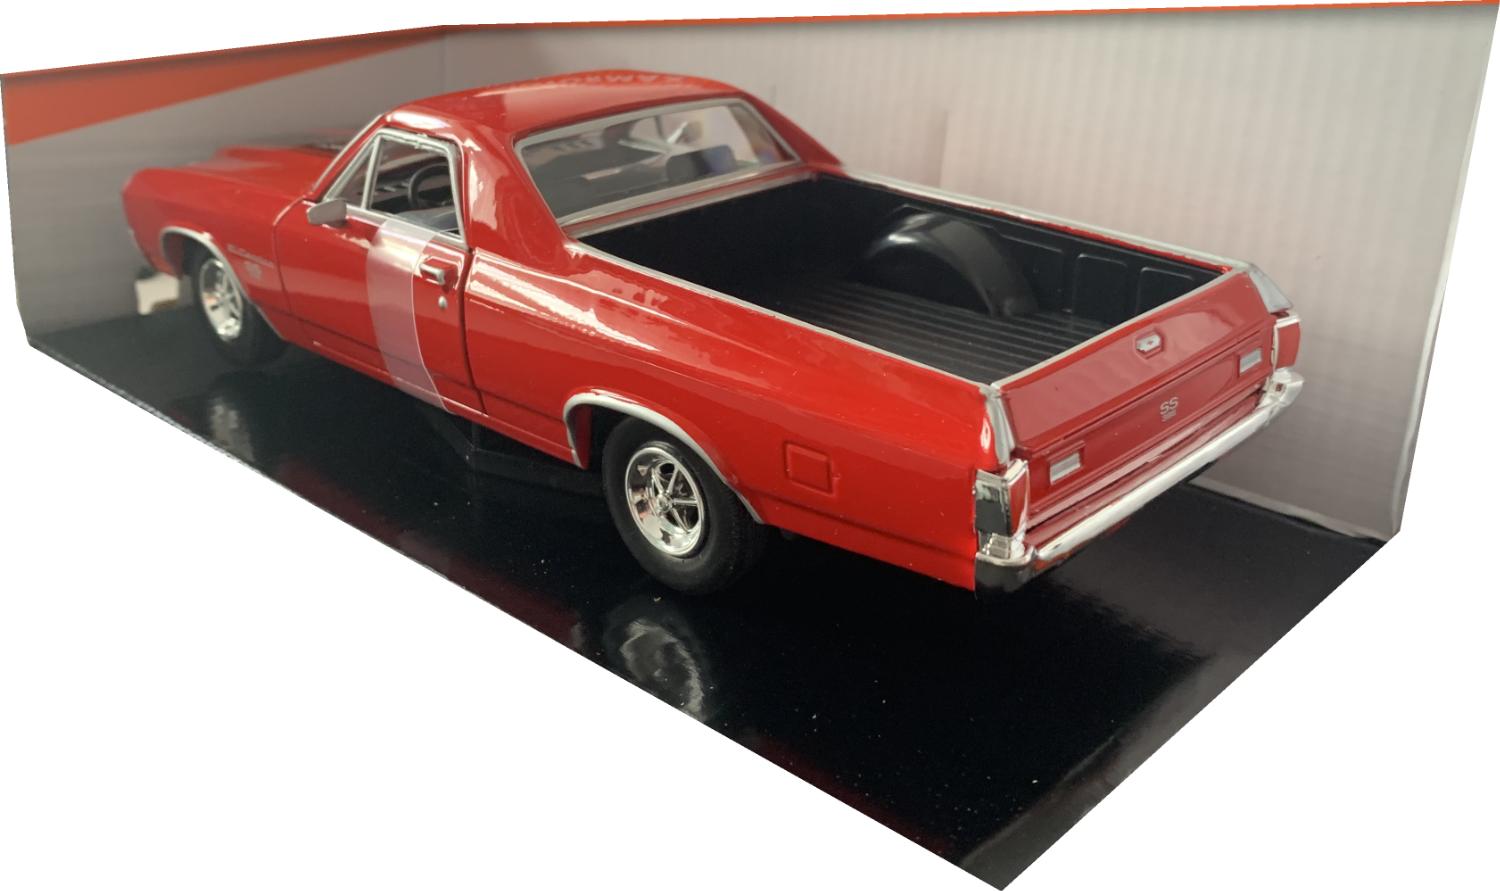 A good production of the Chevy El Camino SS 396 with detail throughout, all authentically recreated.  Model is presented in a window display box.  The car is approx. 22cm long and the presentation box is 24½ cm long